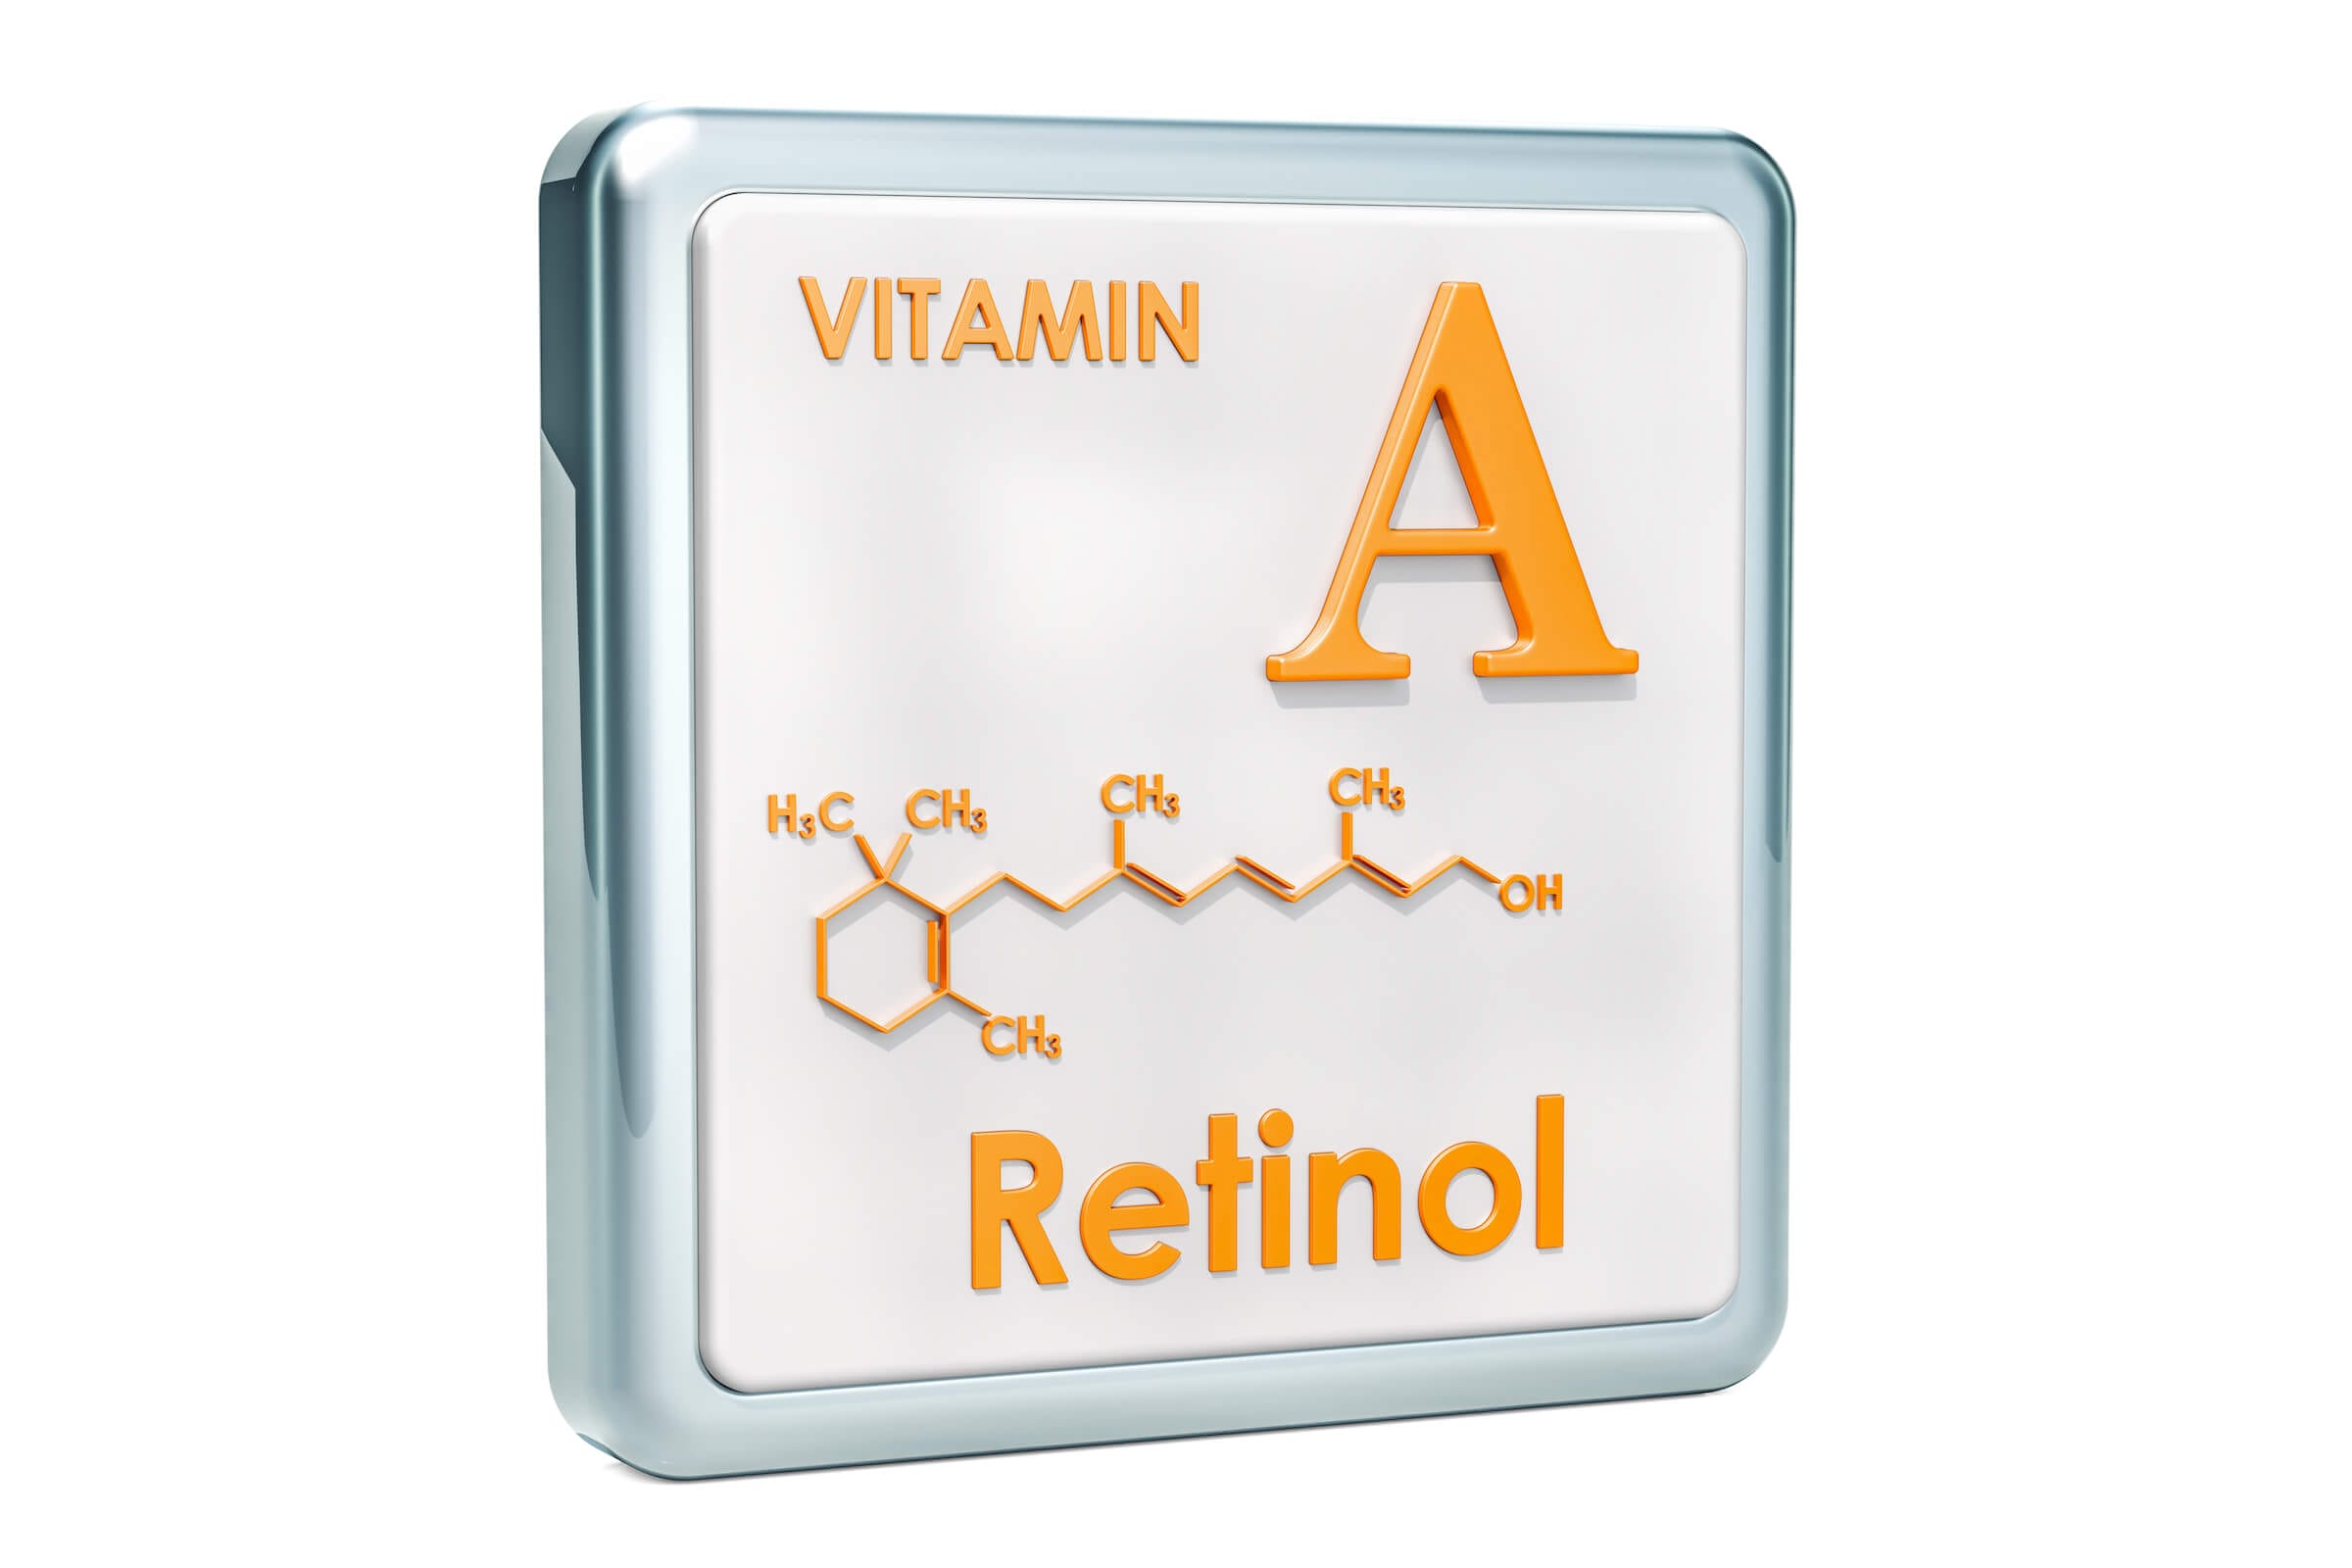 Liver is rich in retinol (the real Vitamin A)